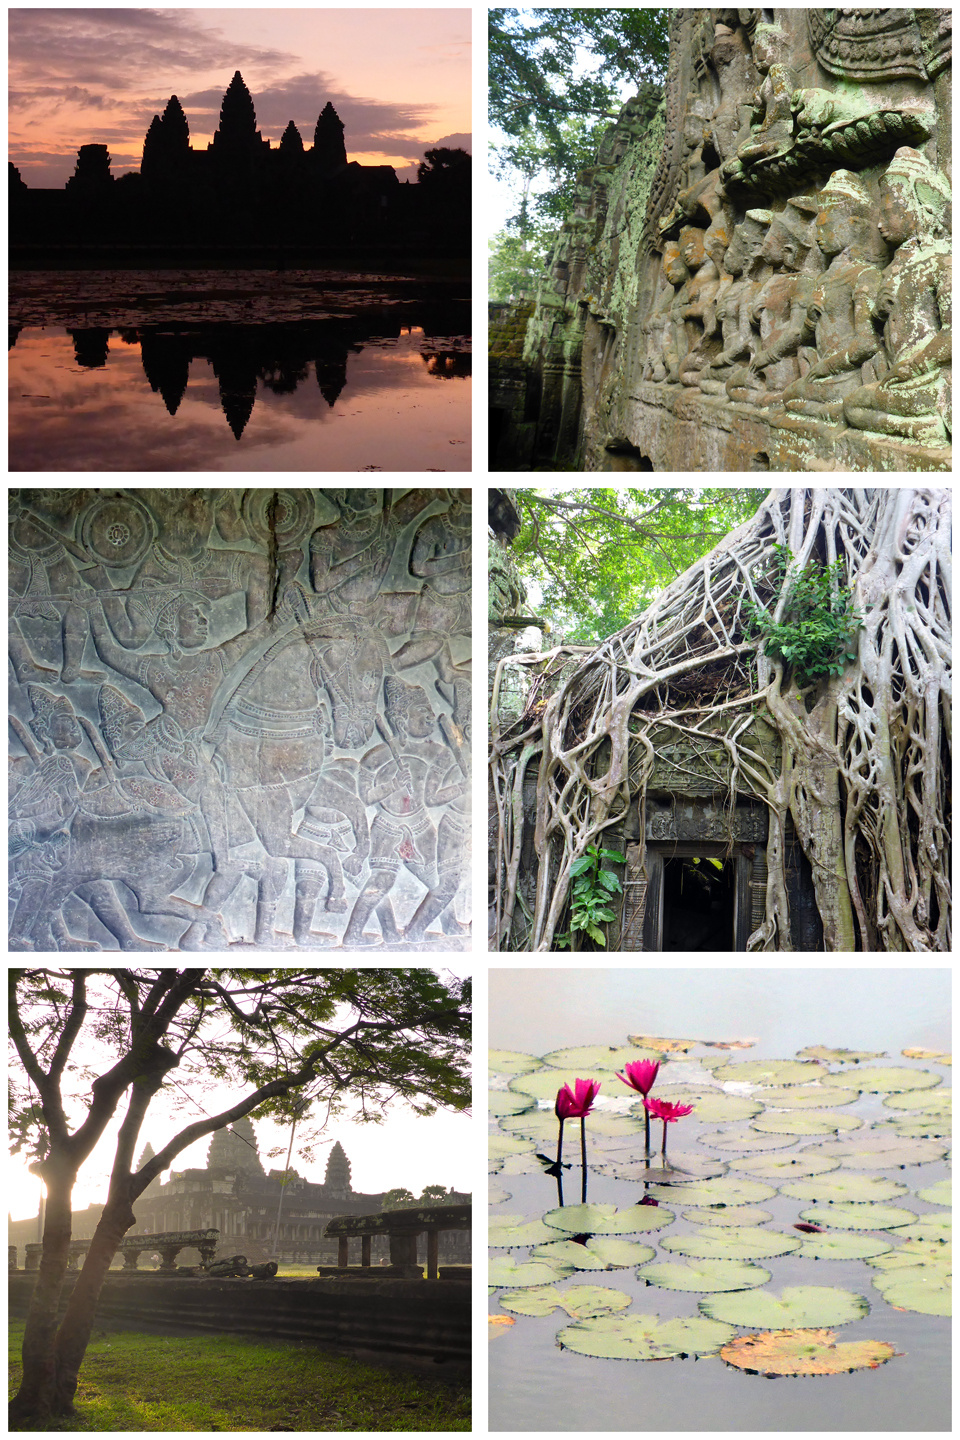 Siem Reap, Angkor Wat, Ta Prohm and other temples in the UNESCO World Heritage zone in Cambodia.